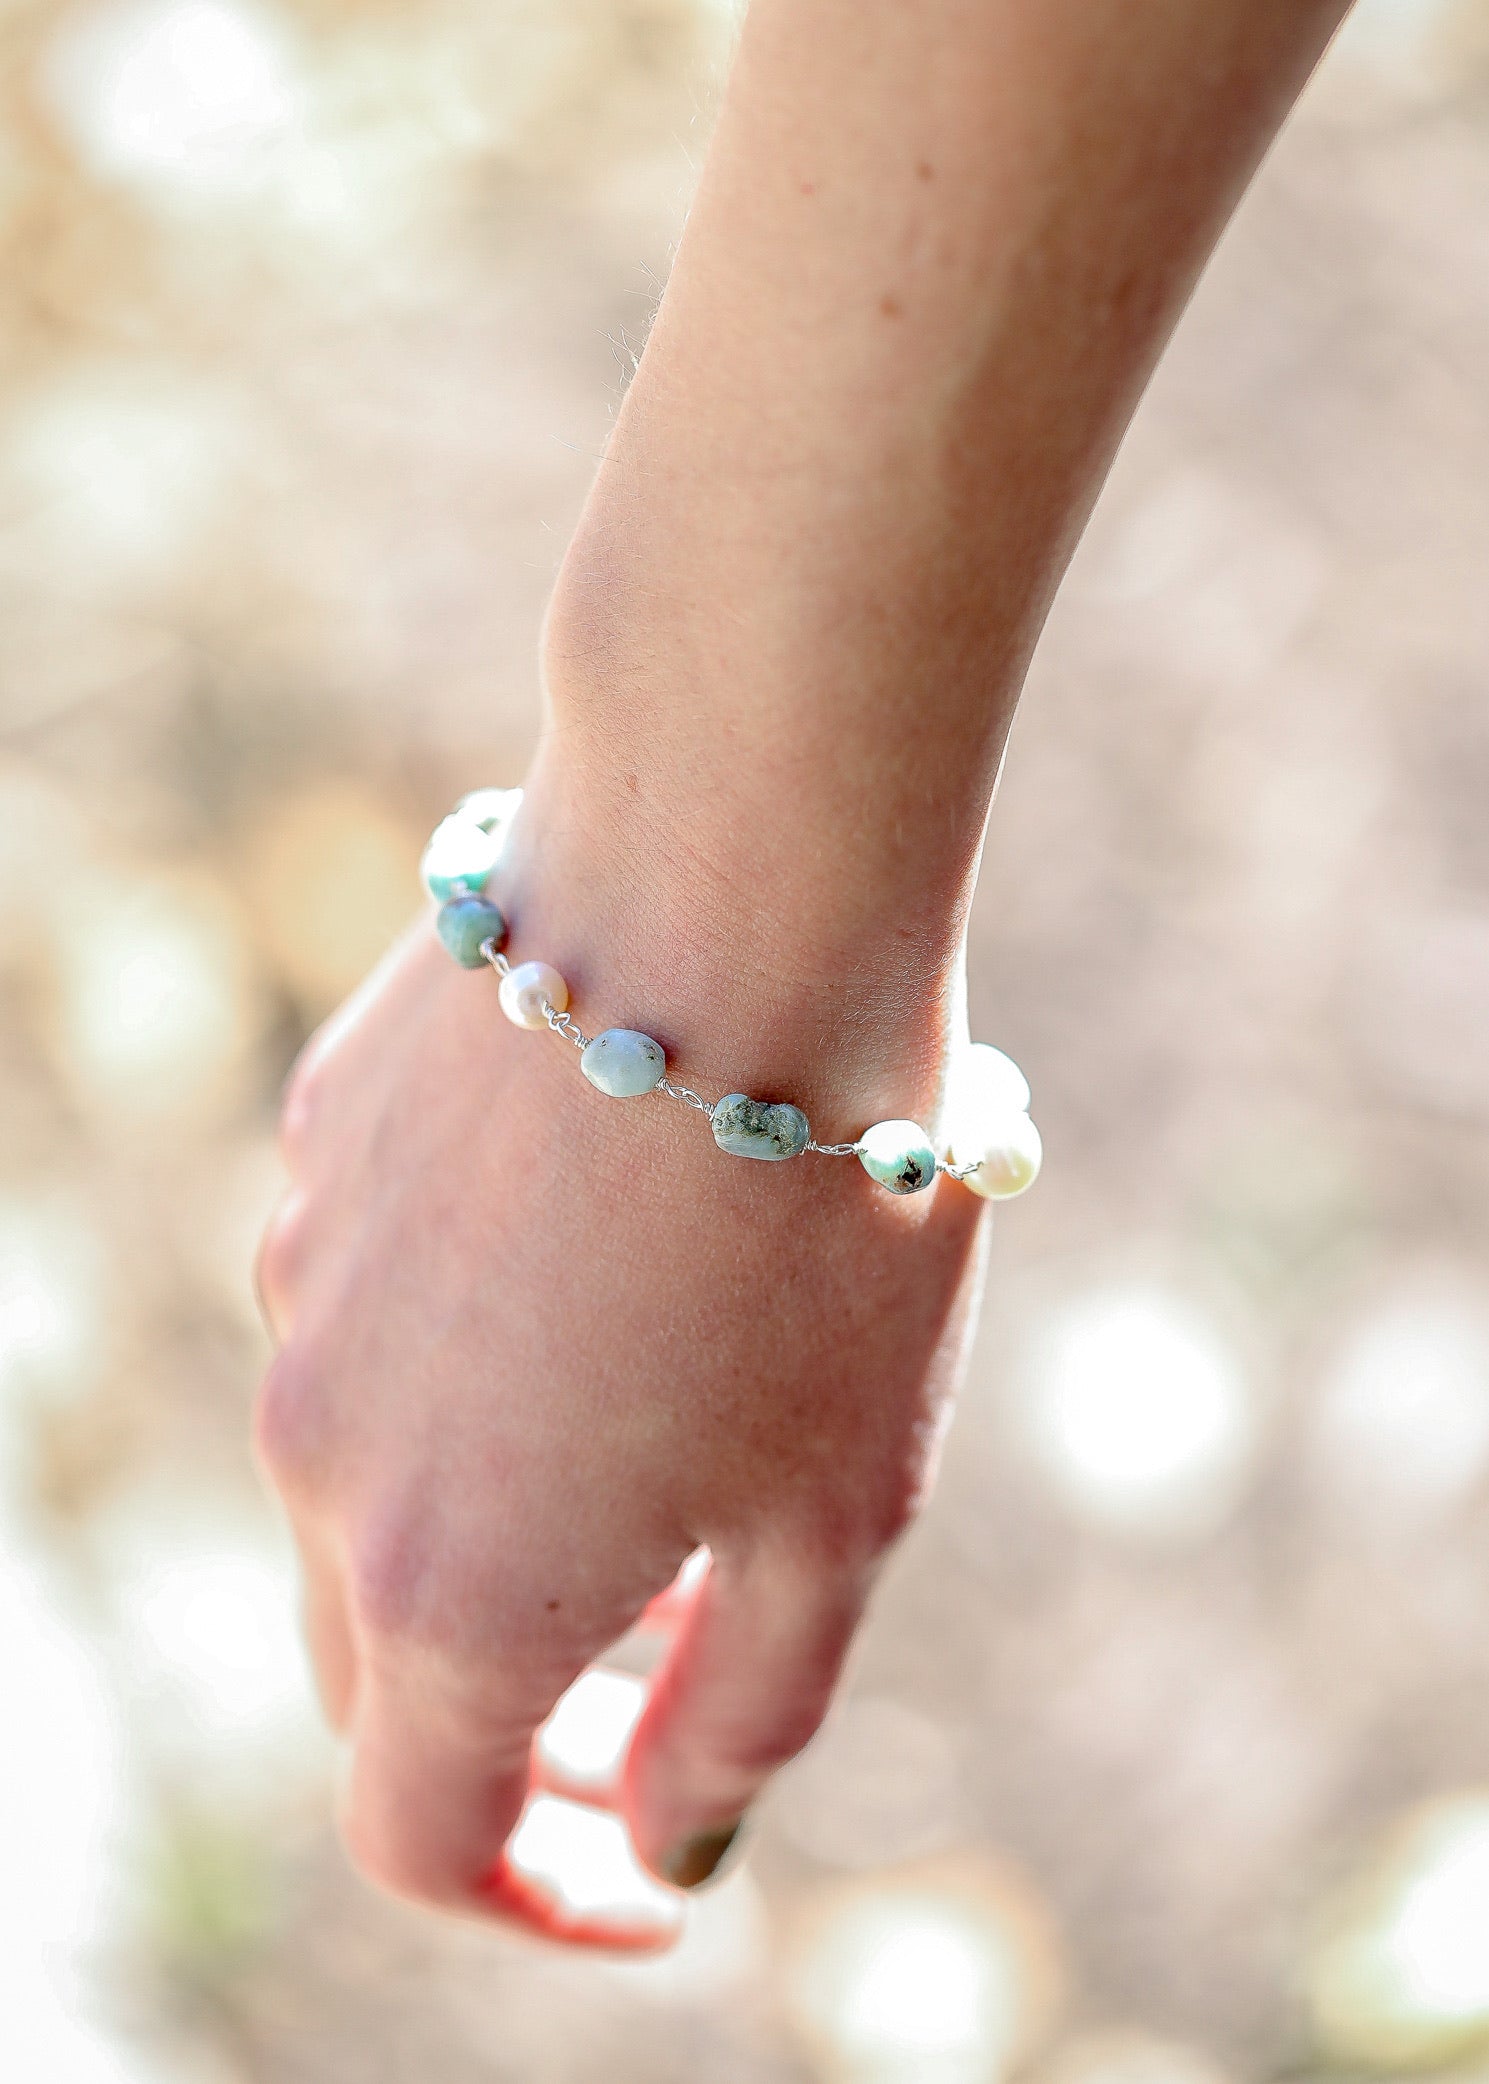 Pearl and amazonite nh bracelet